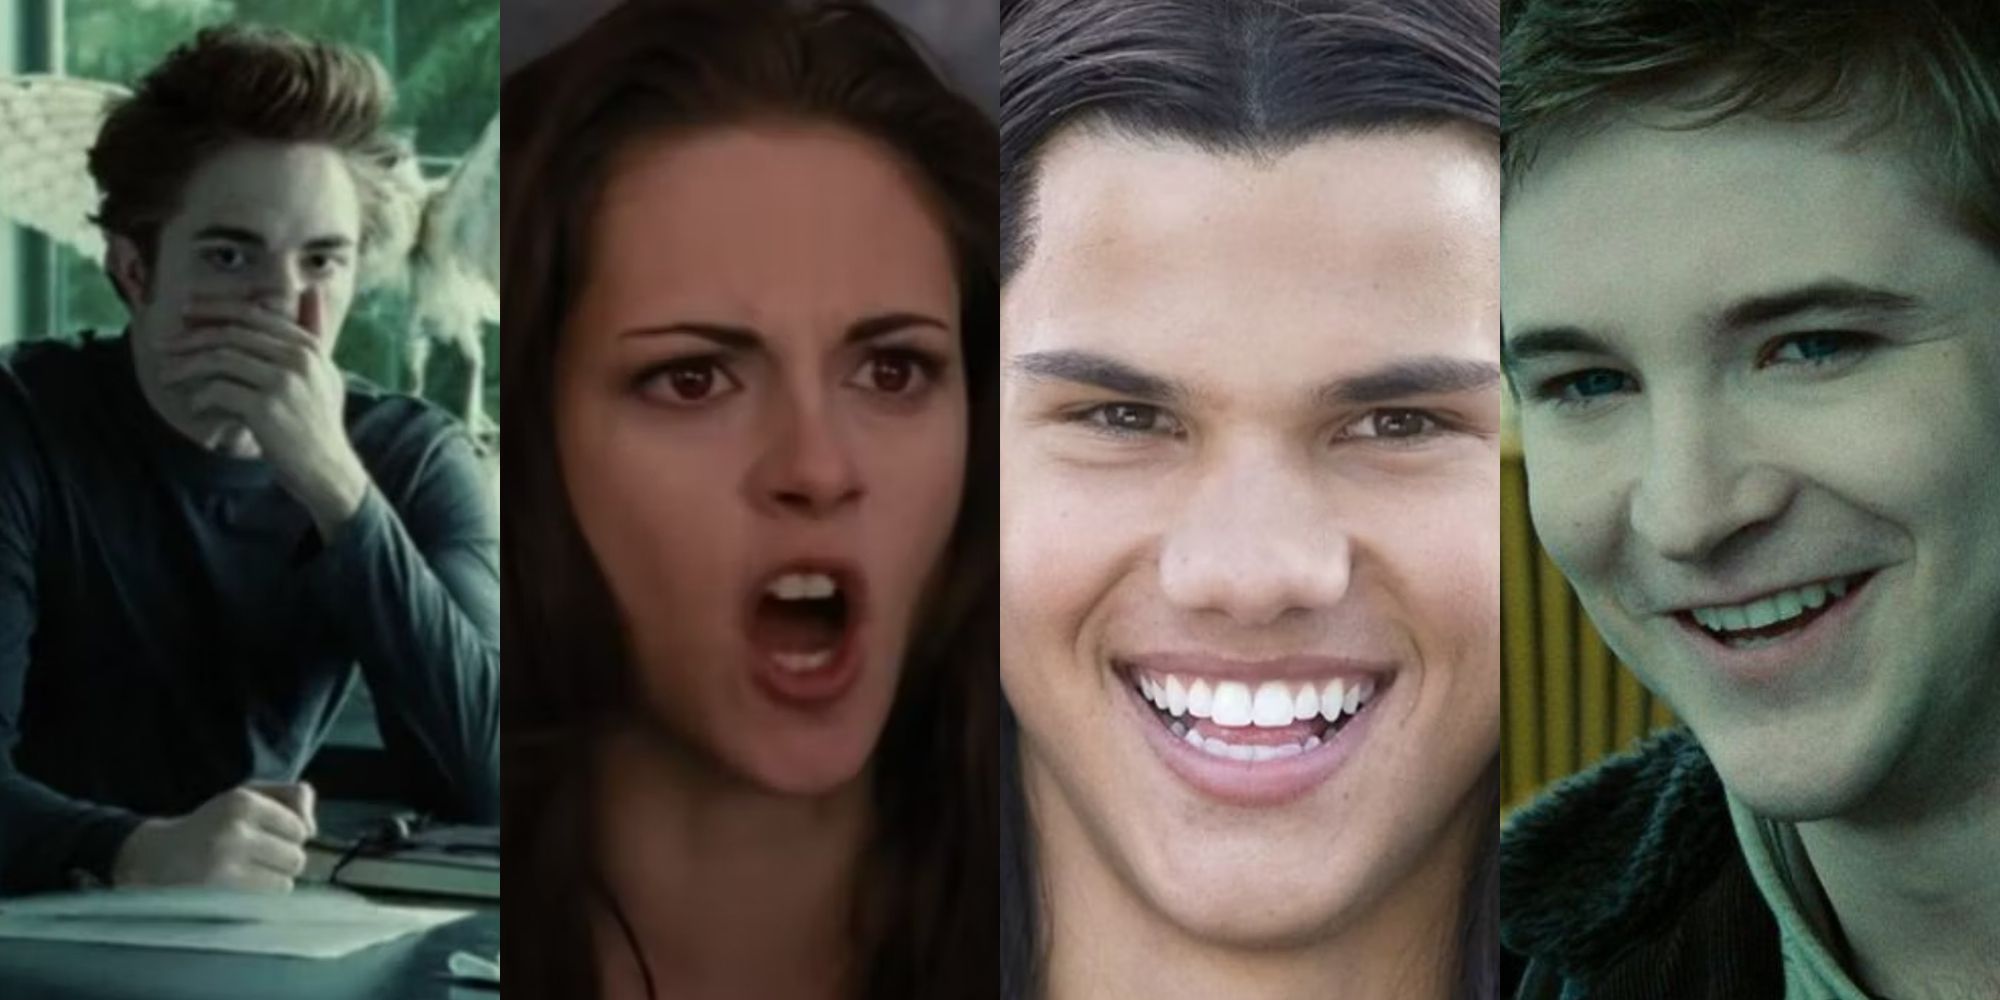 A split imag of characters from Twilight